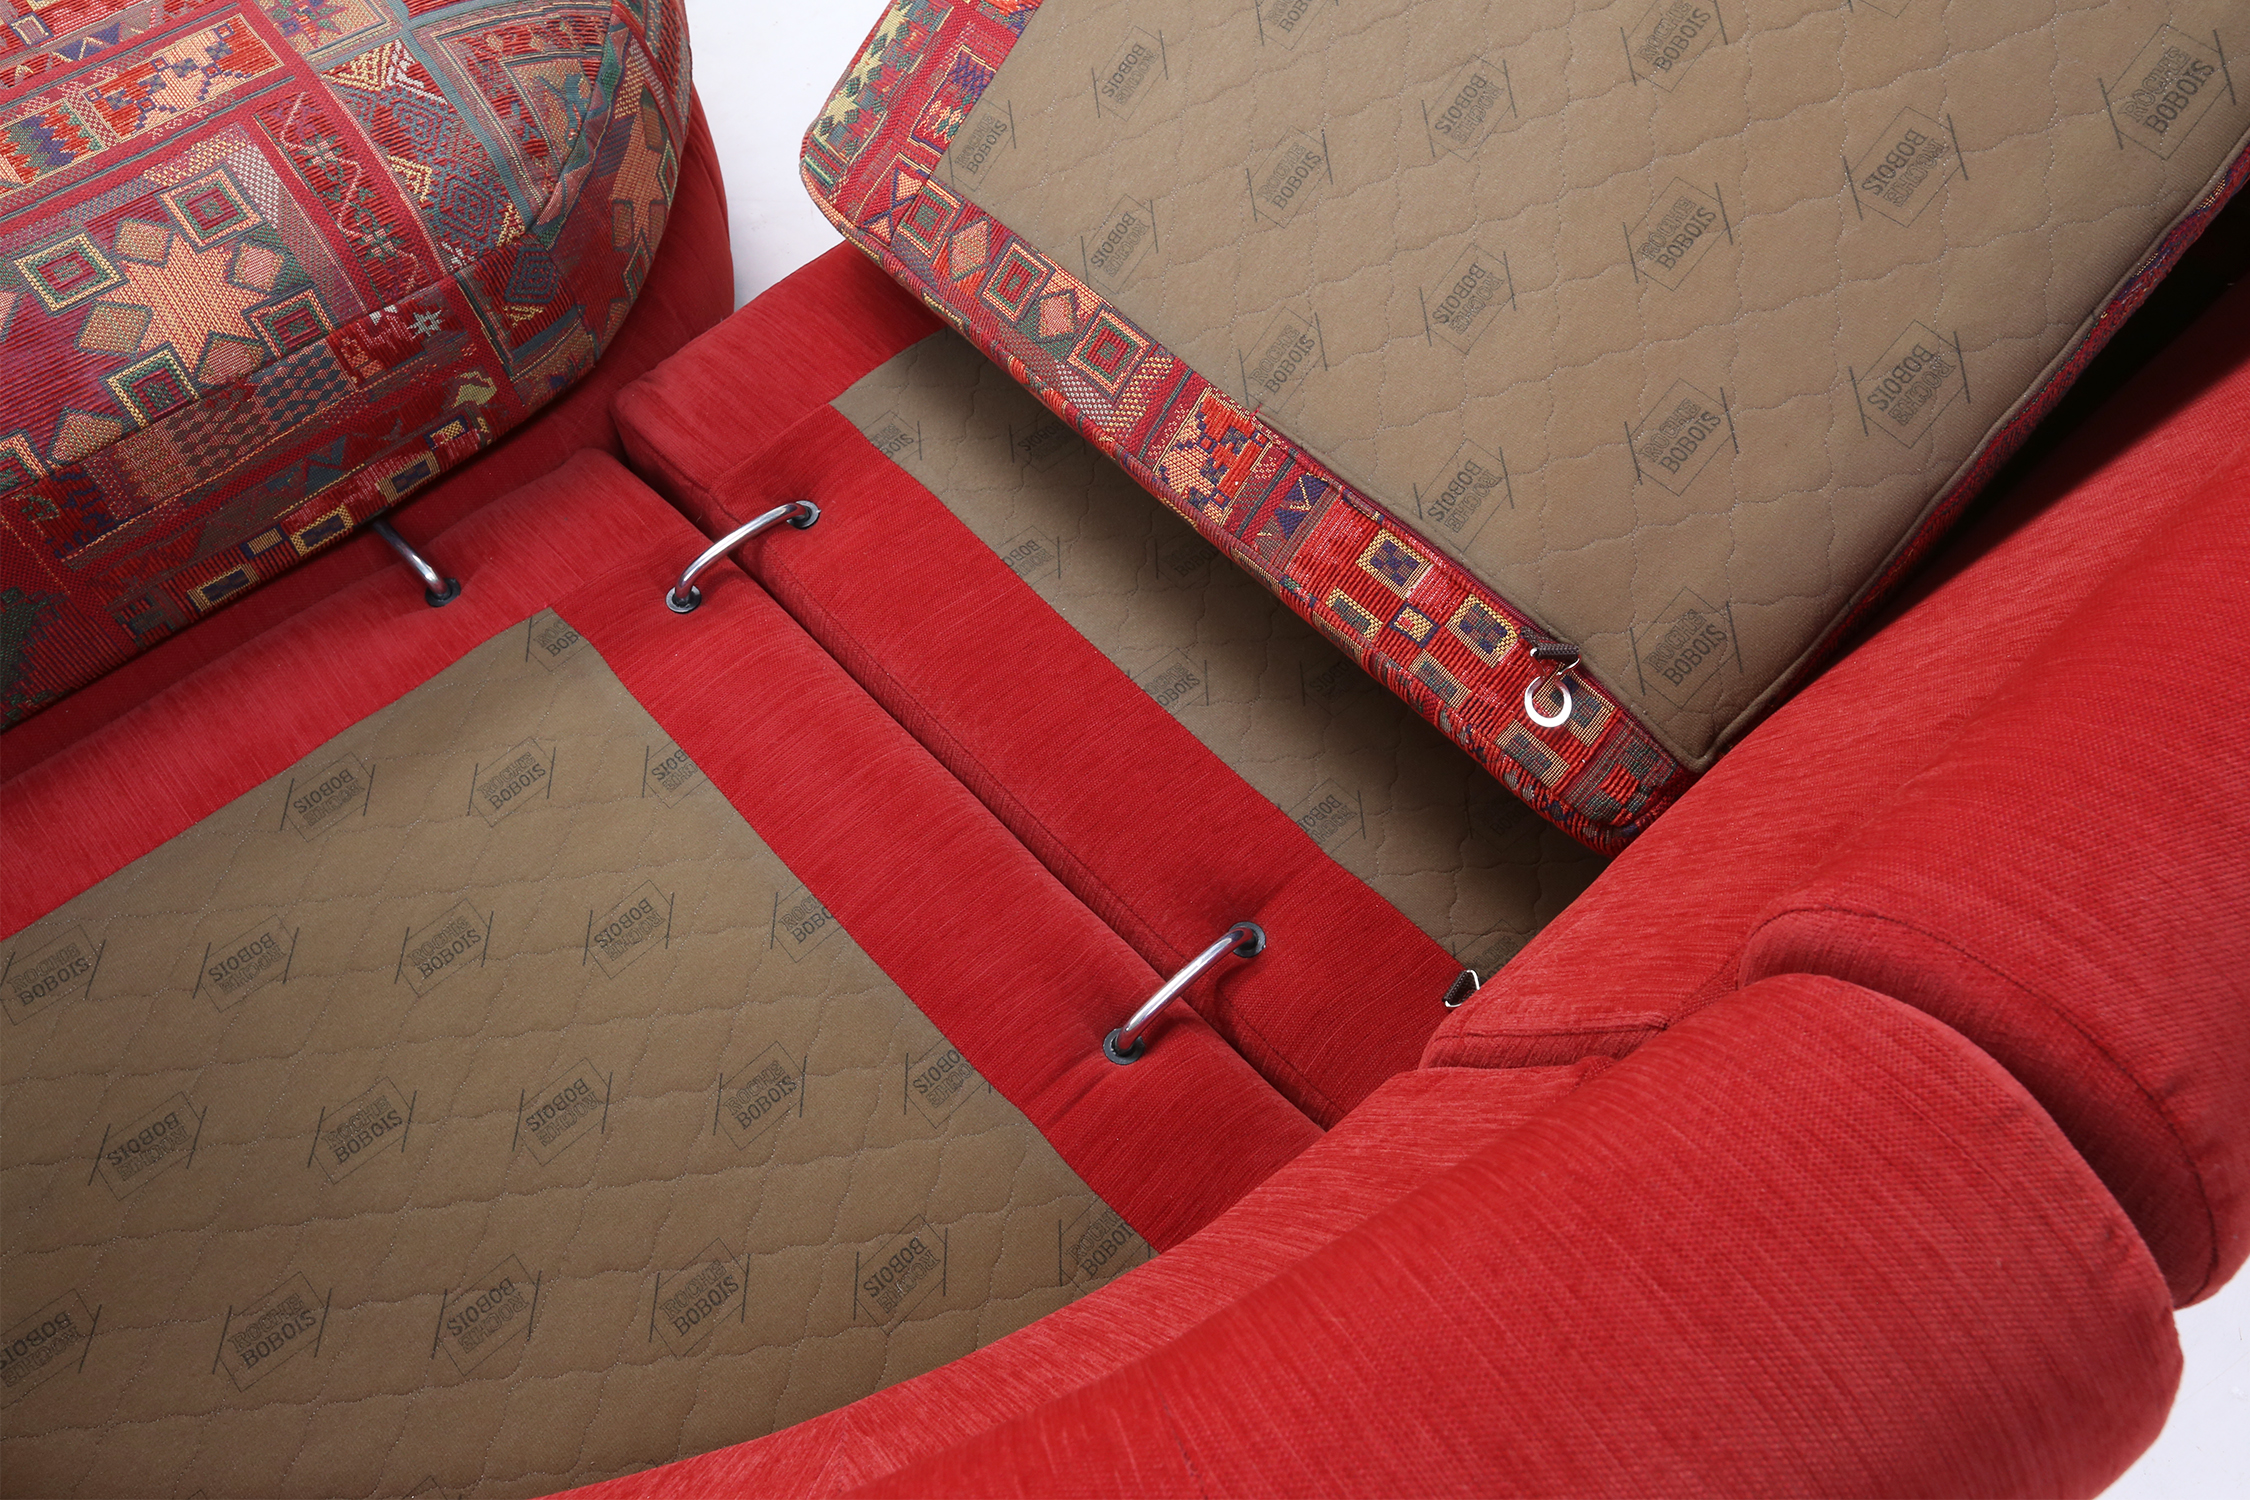 Roche Bobois modular sofa in red and patterned upholstery 1980thumbnail